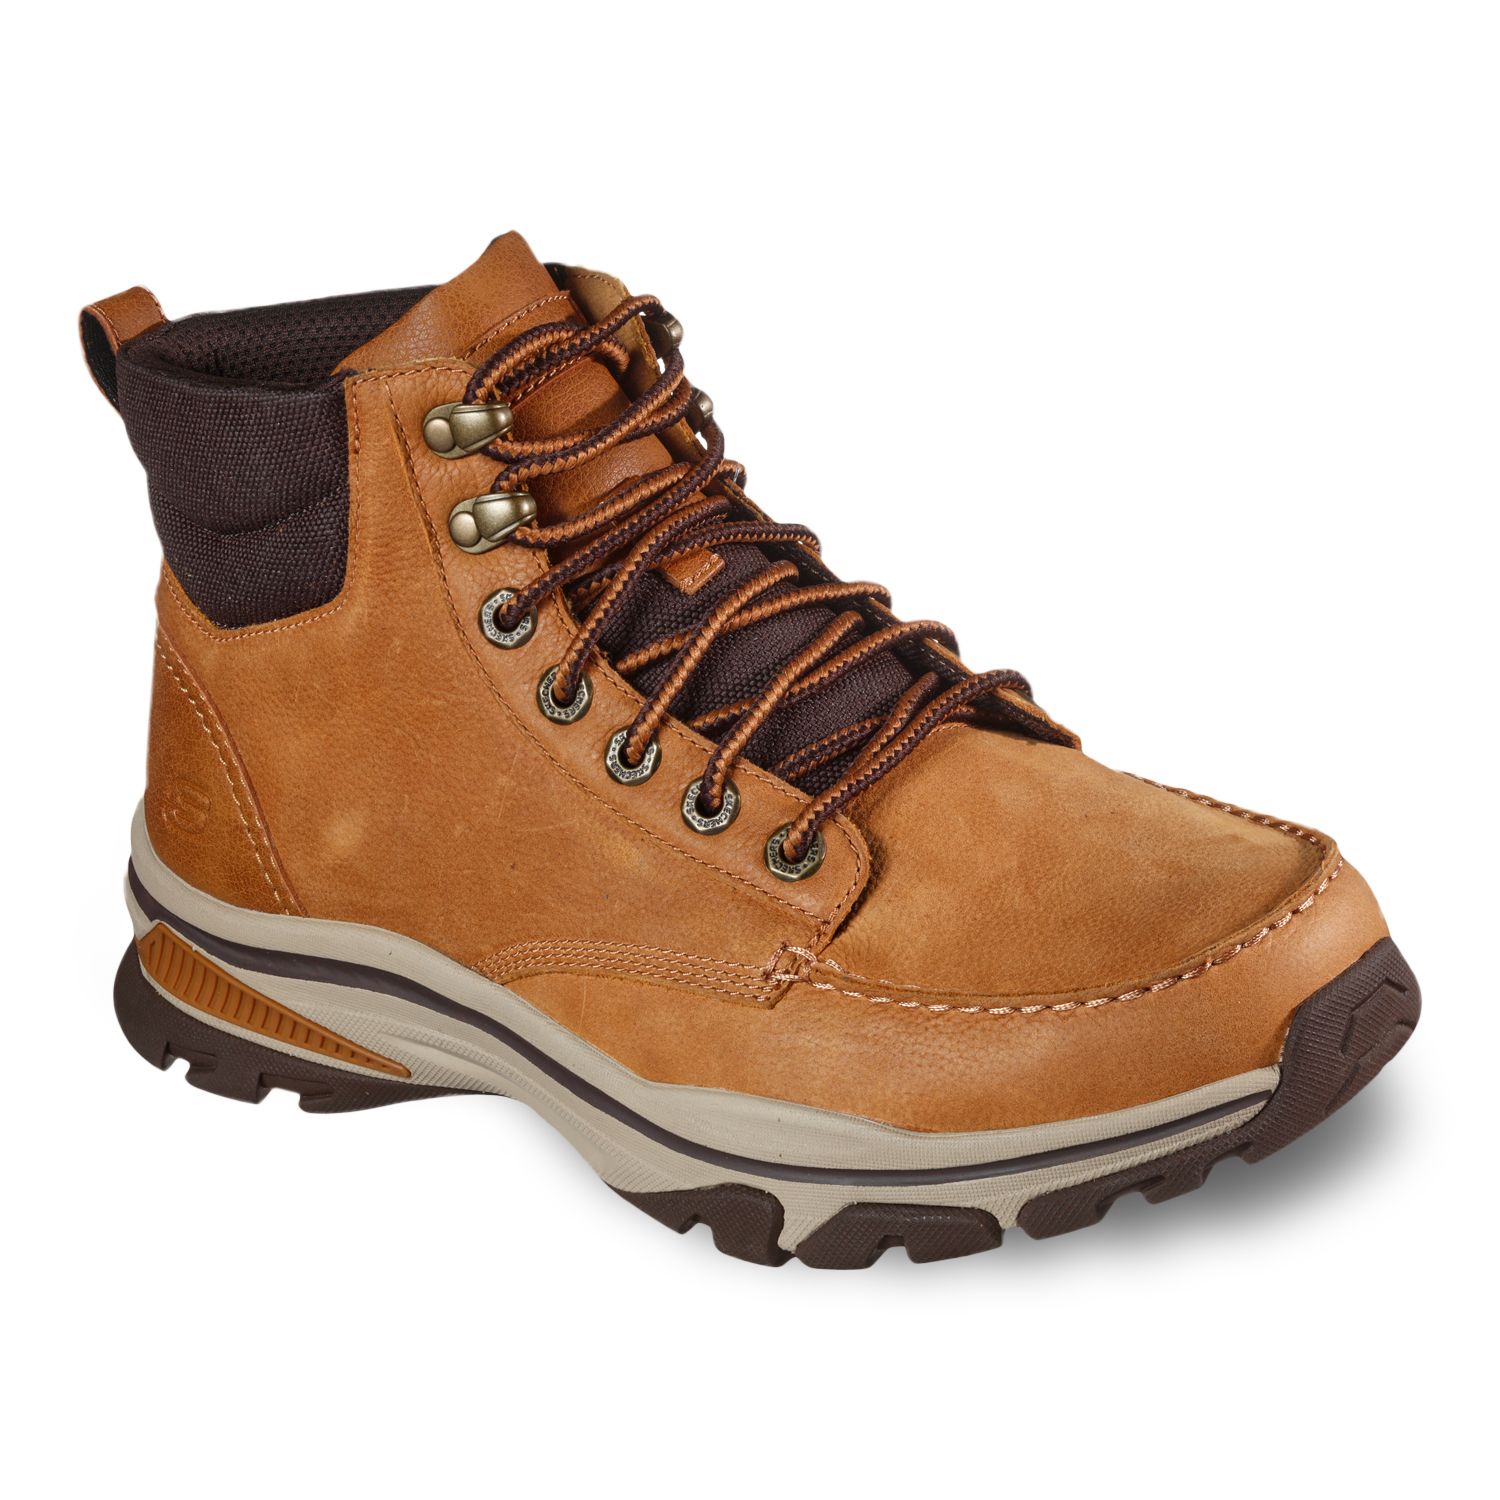 Mens Boots Clearance, SAVE 59%.